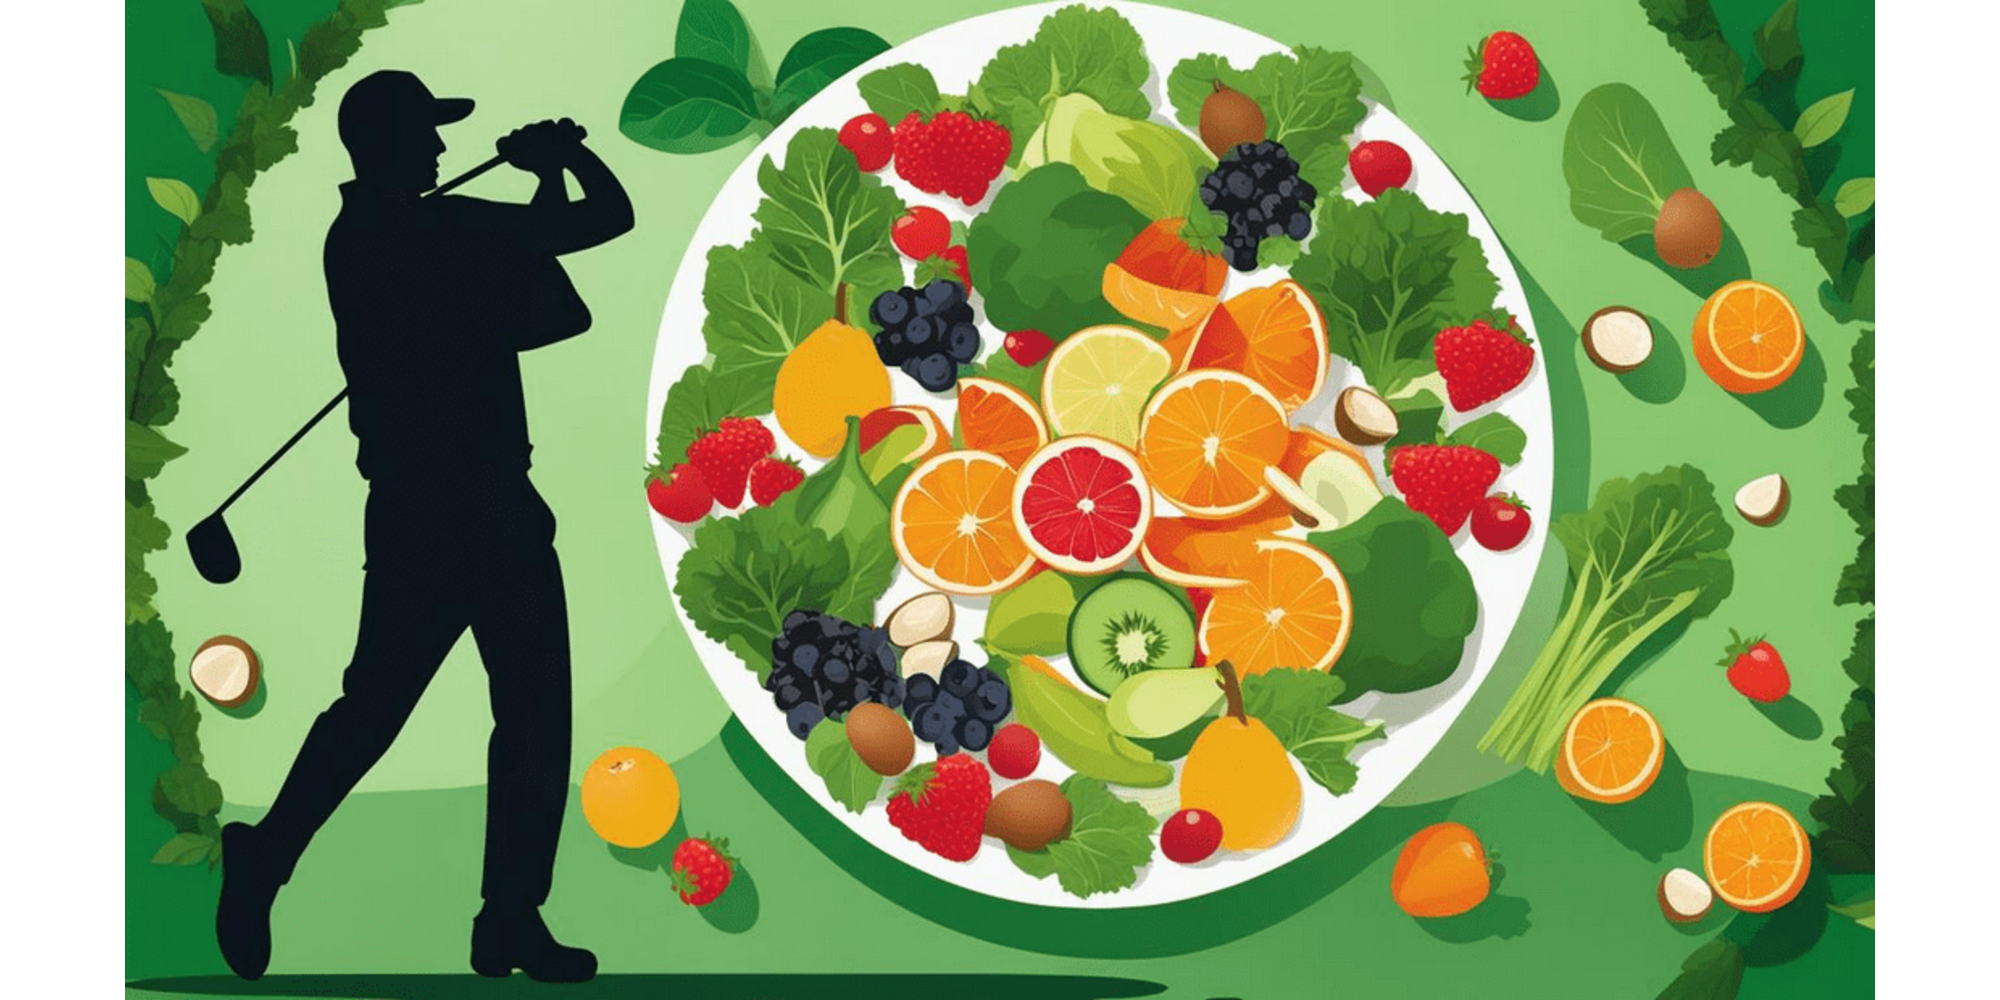 Performance-boosting foods for golf